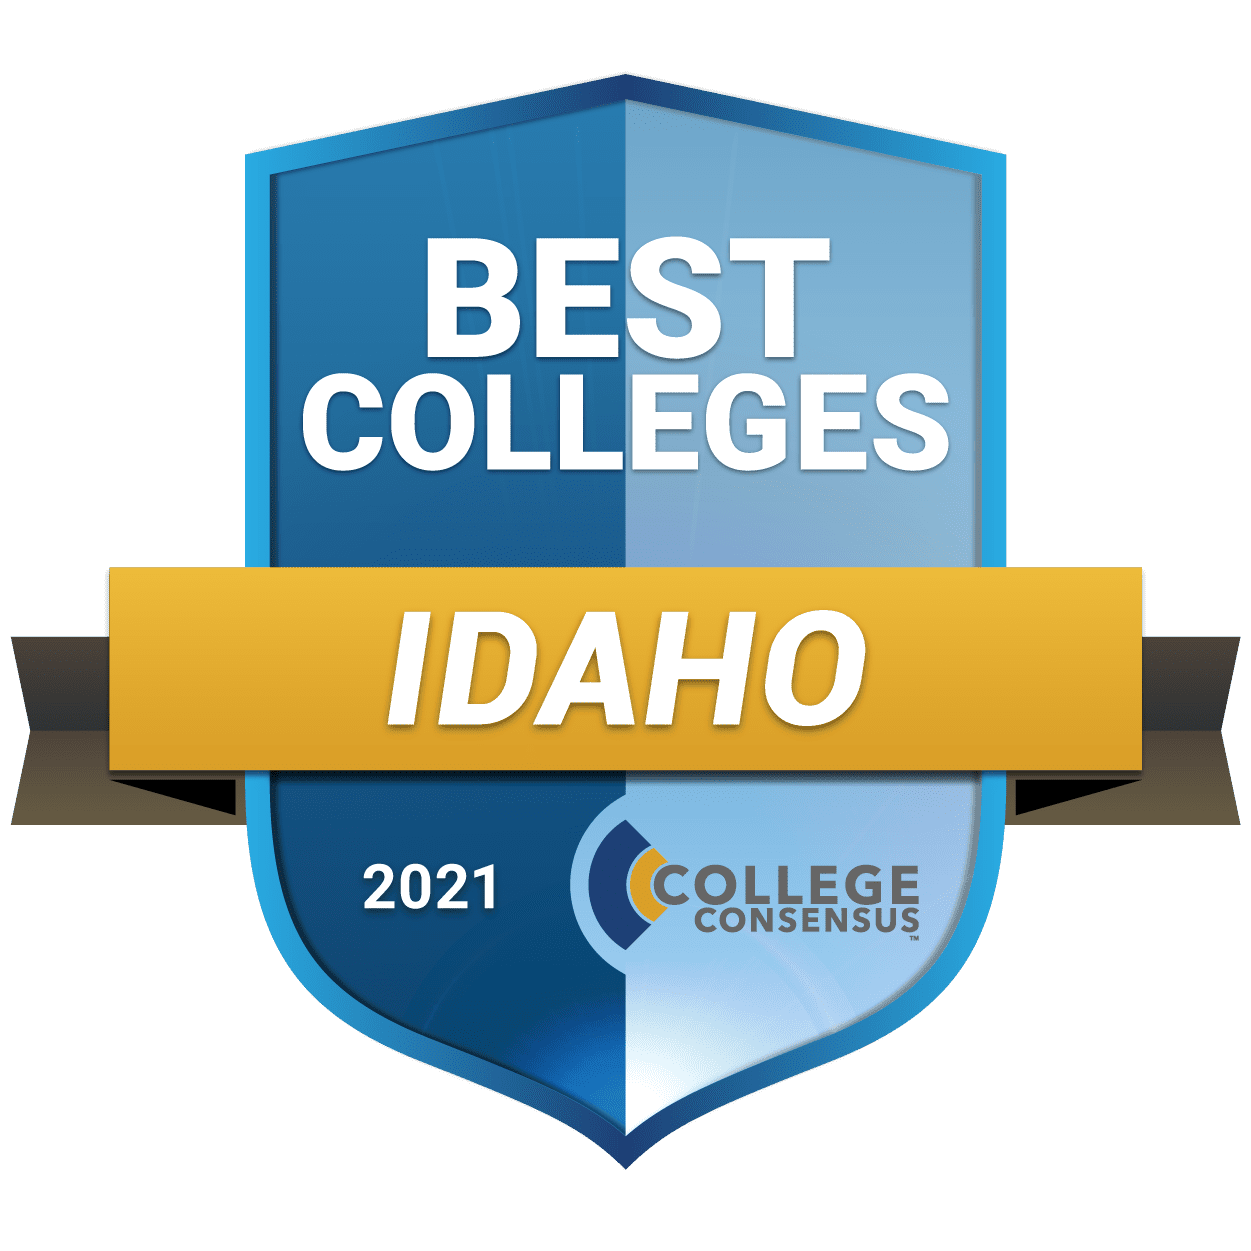 Best Colleges And Universities In Idaho Top Consensus Ranked Schools In Idaho 2021 3711